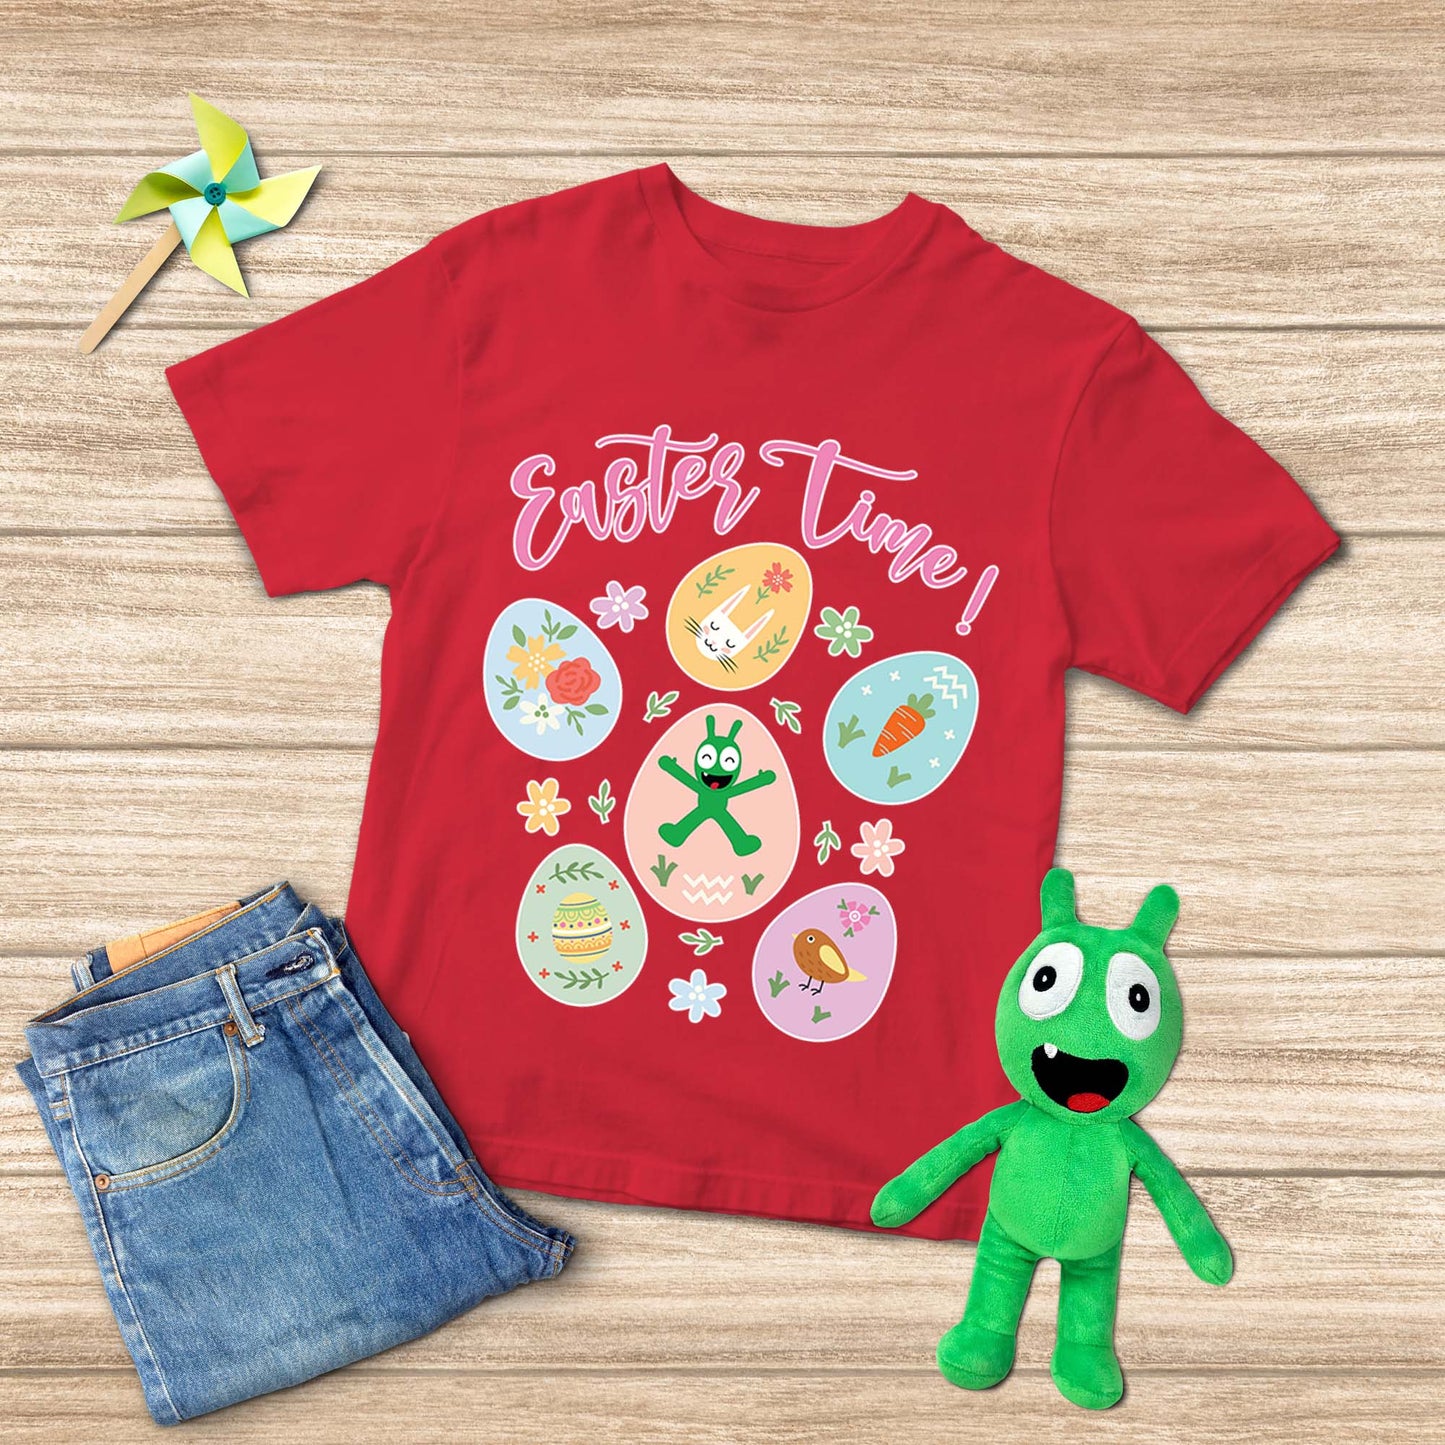 Pea Pea Easter Time ! Youth T Shirt